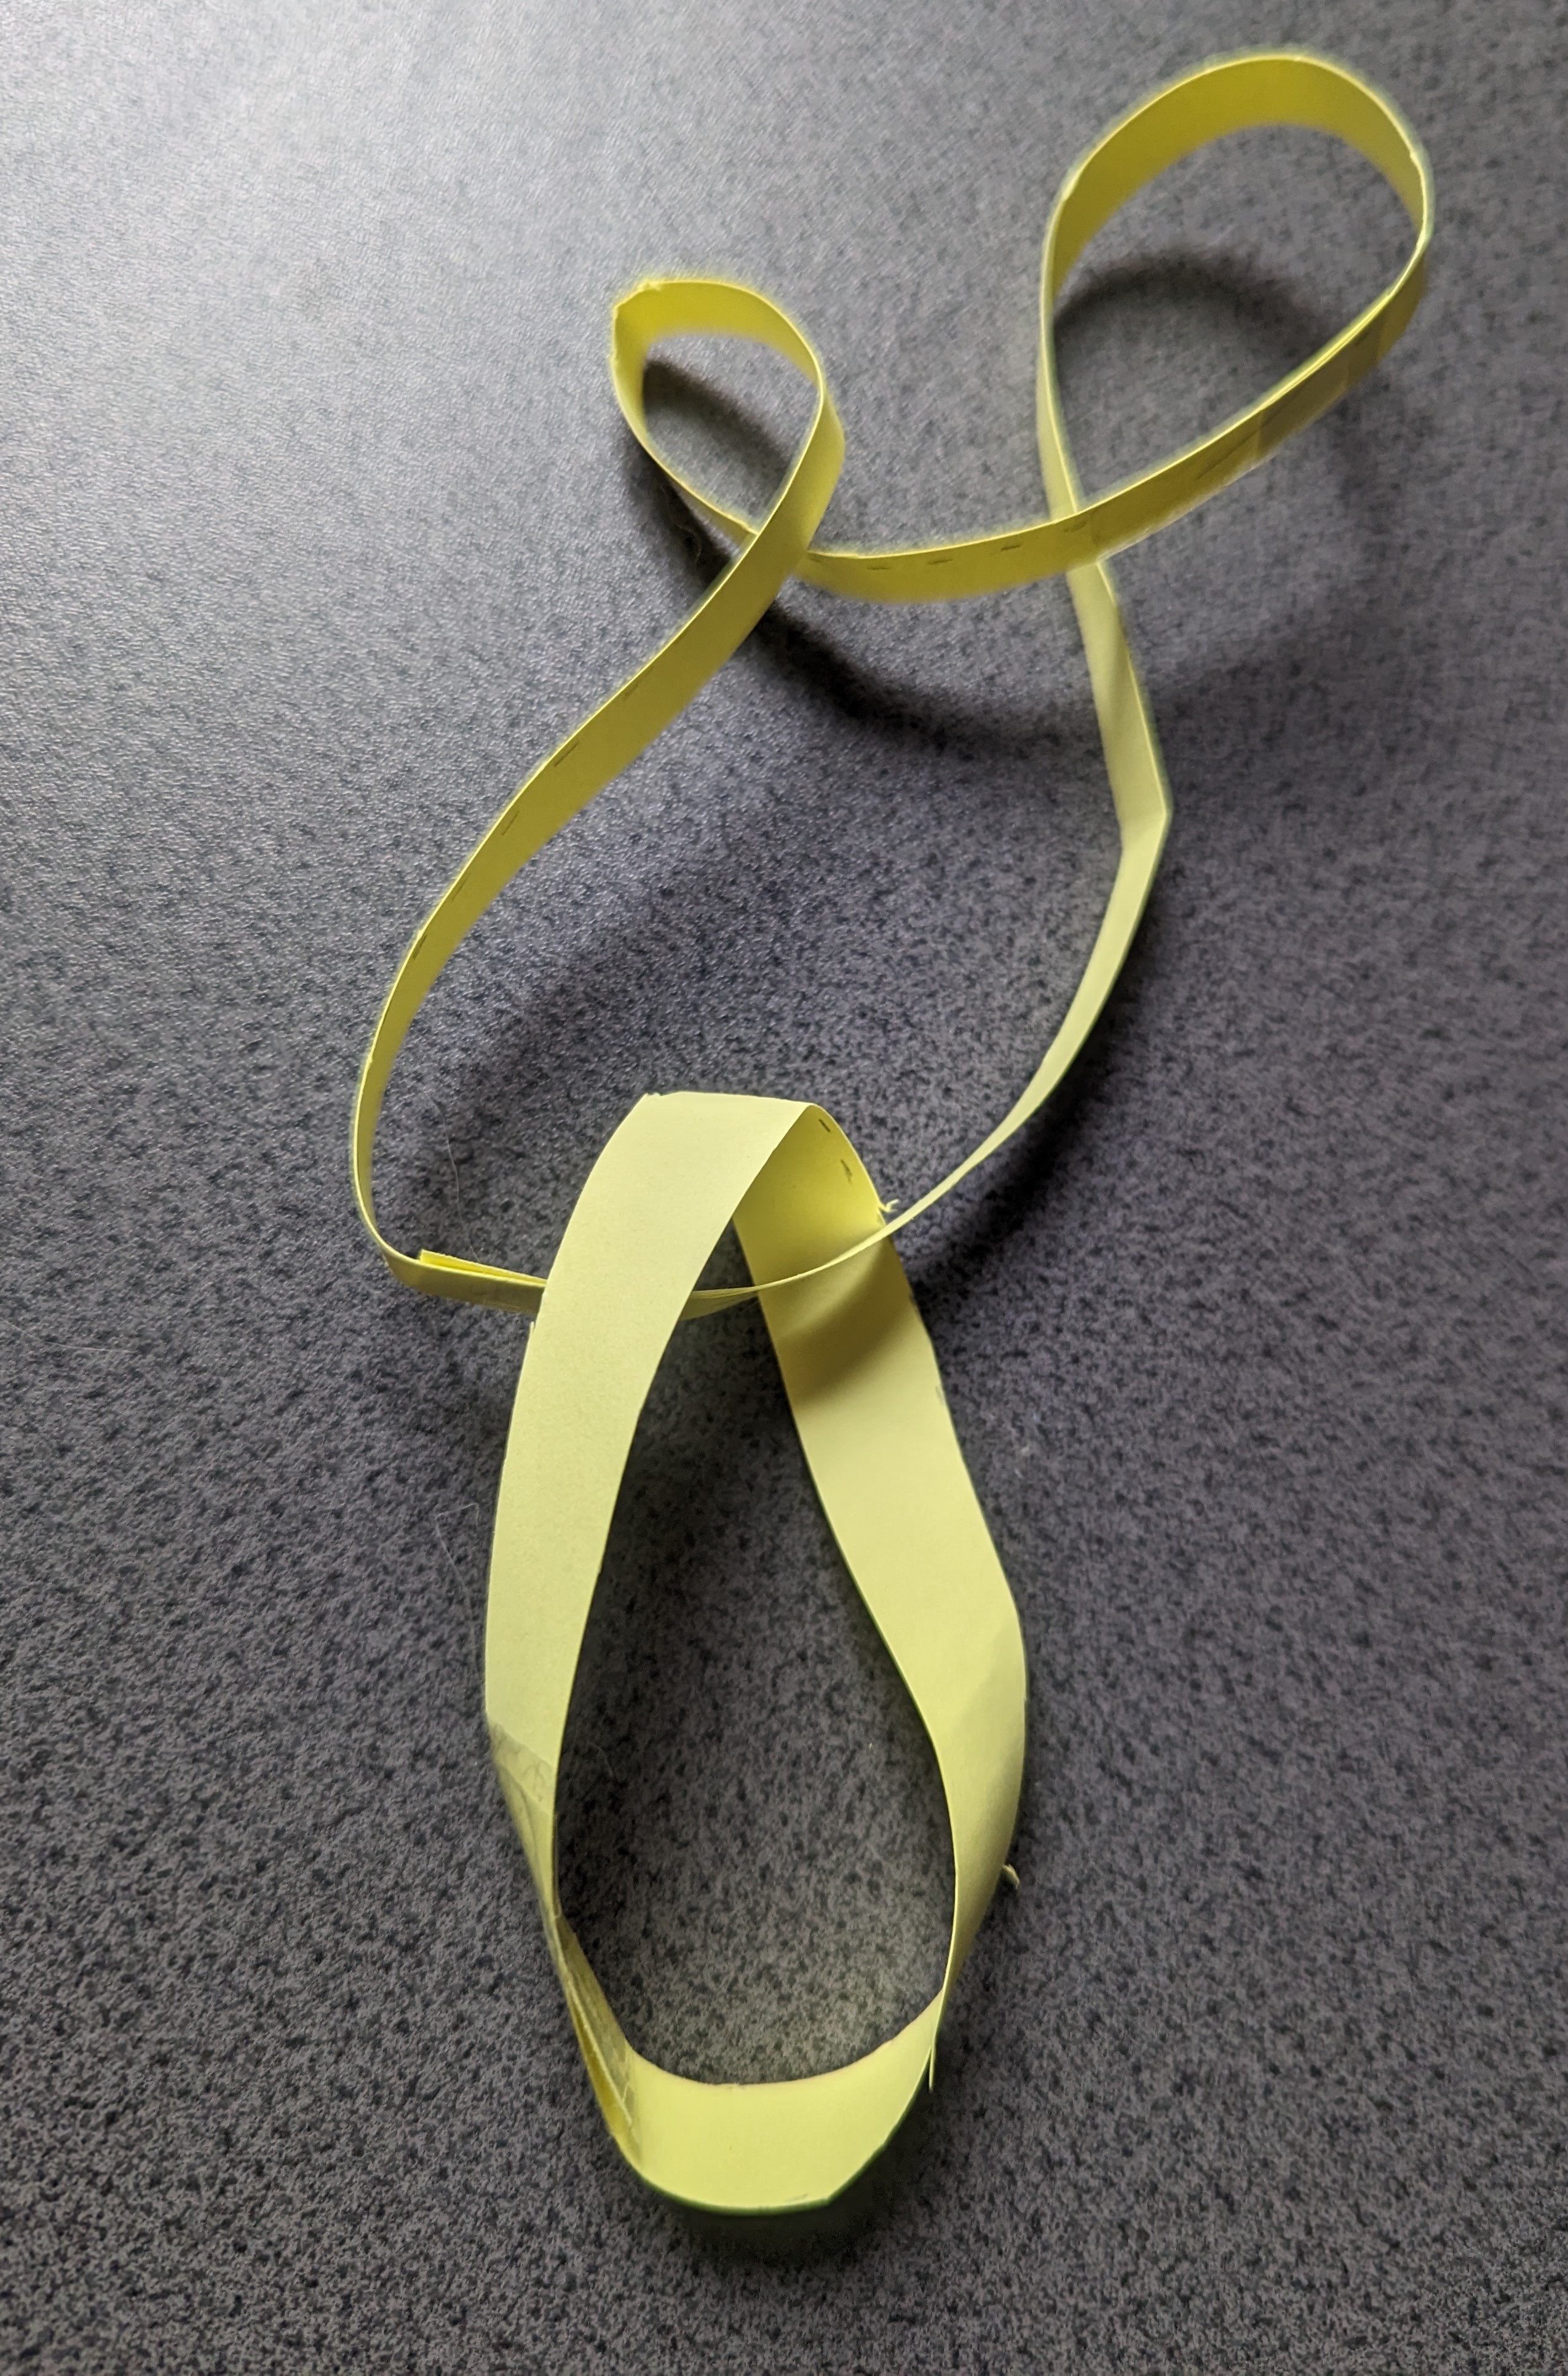 A Möbius Strip interlocked with a loop containing four twists.